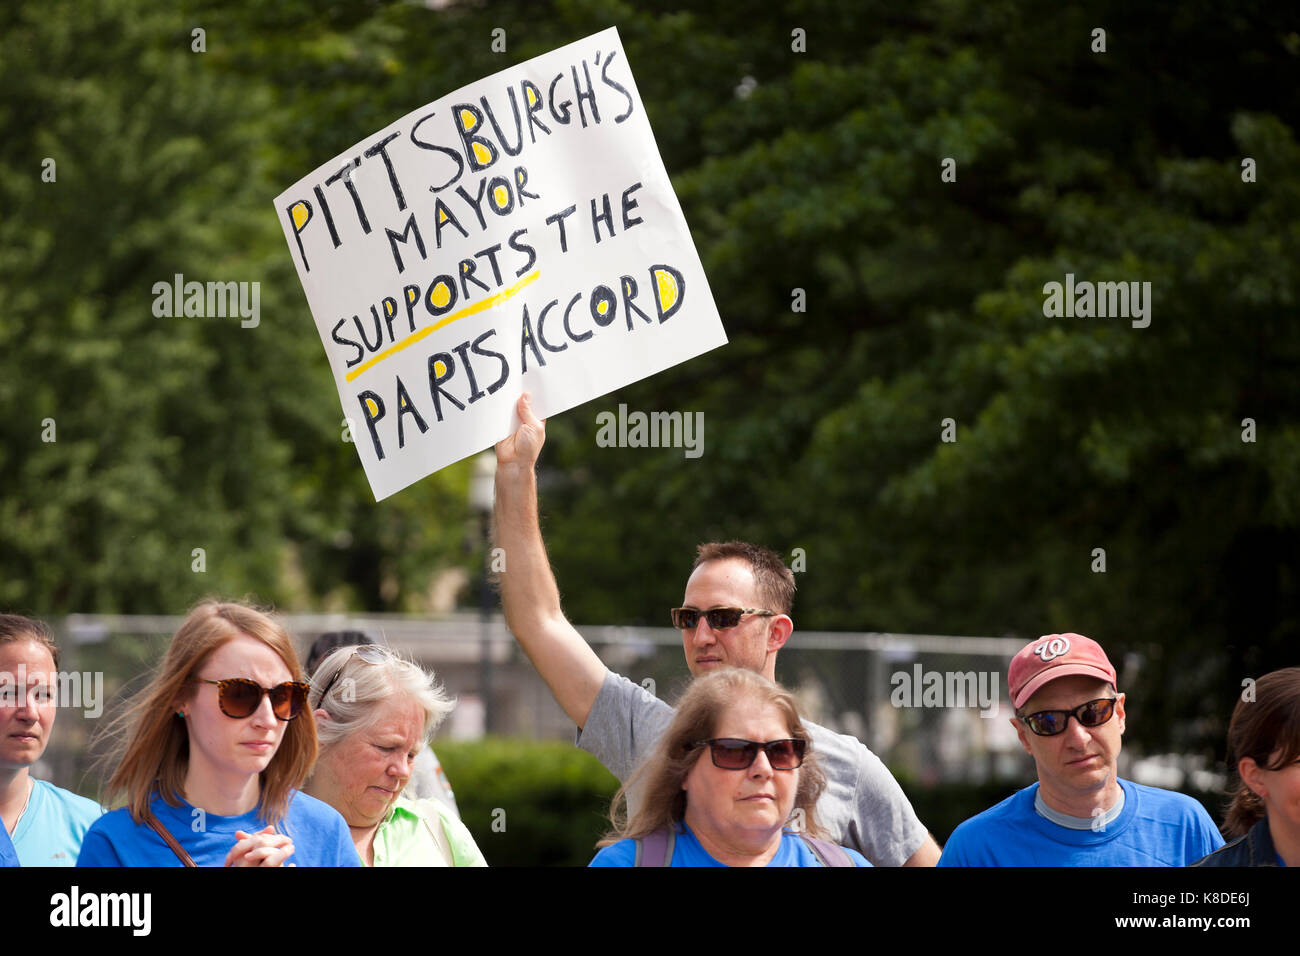 Climate change activist holding sign which reads 'Pittsburgh's Mayer Supports the Paris Accord' - Washington, DC USA Stock Photo